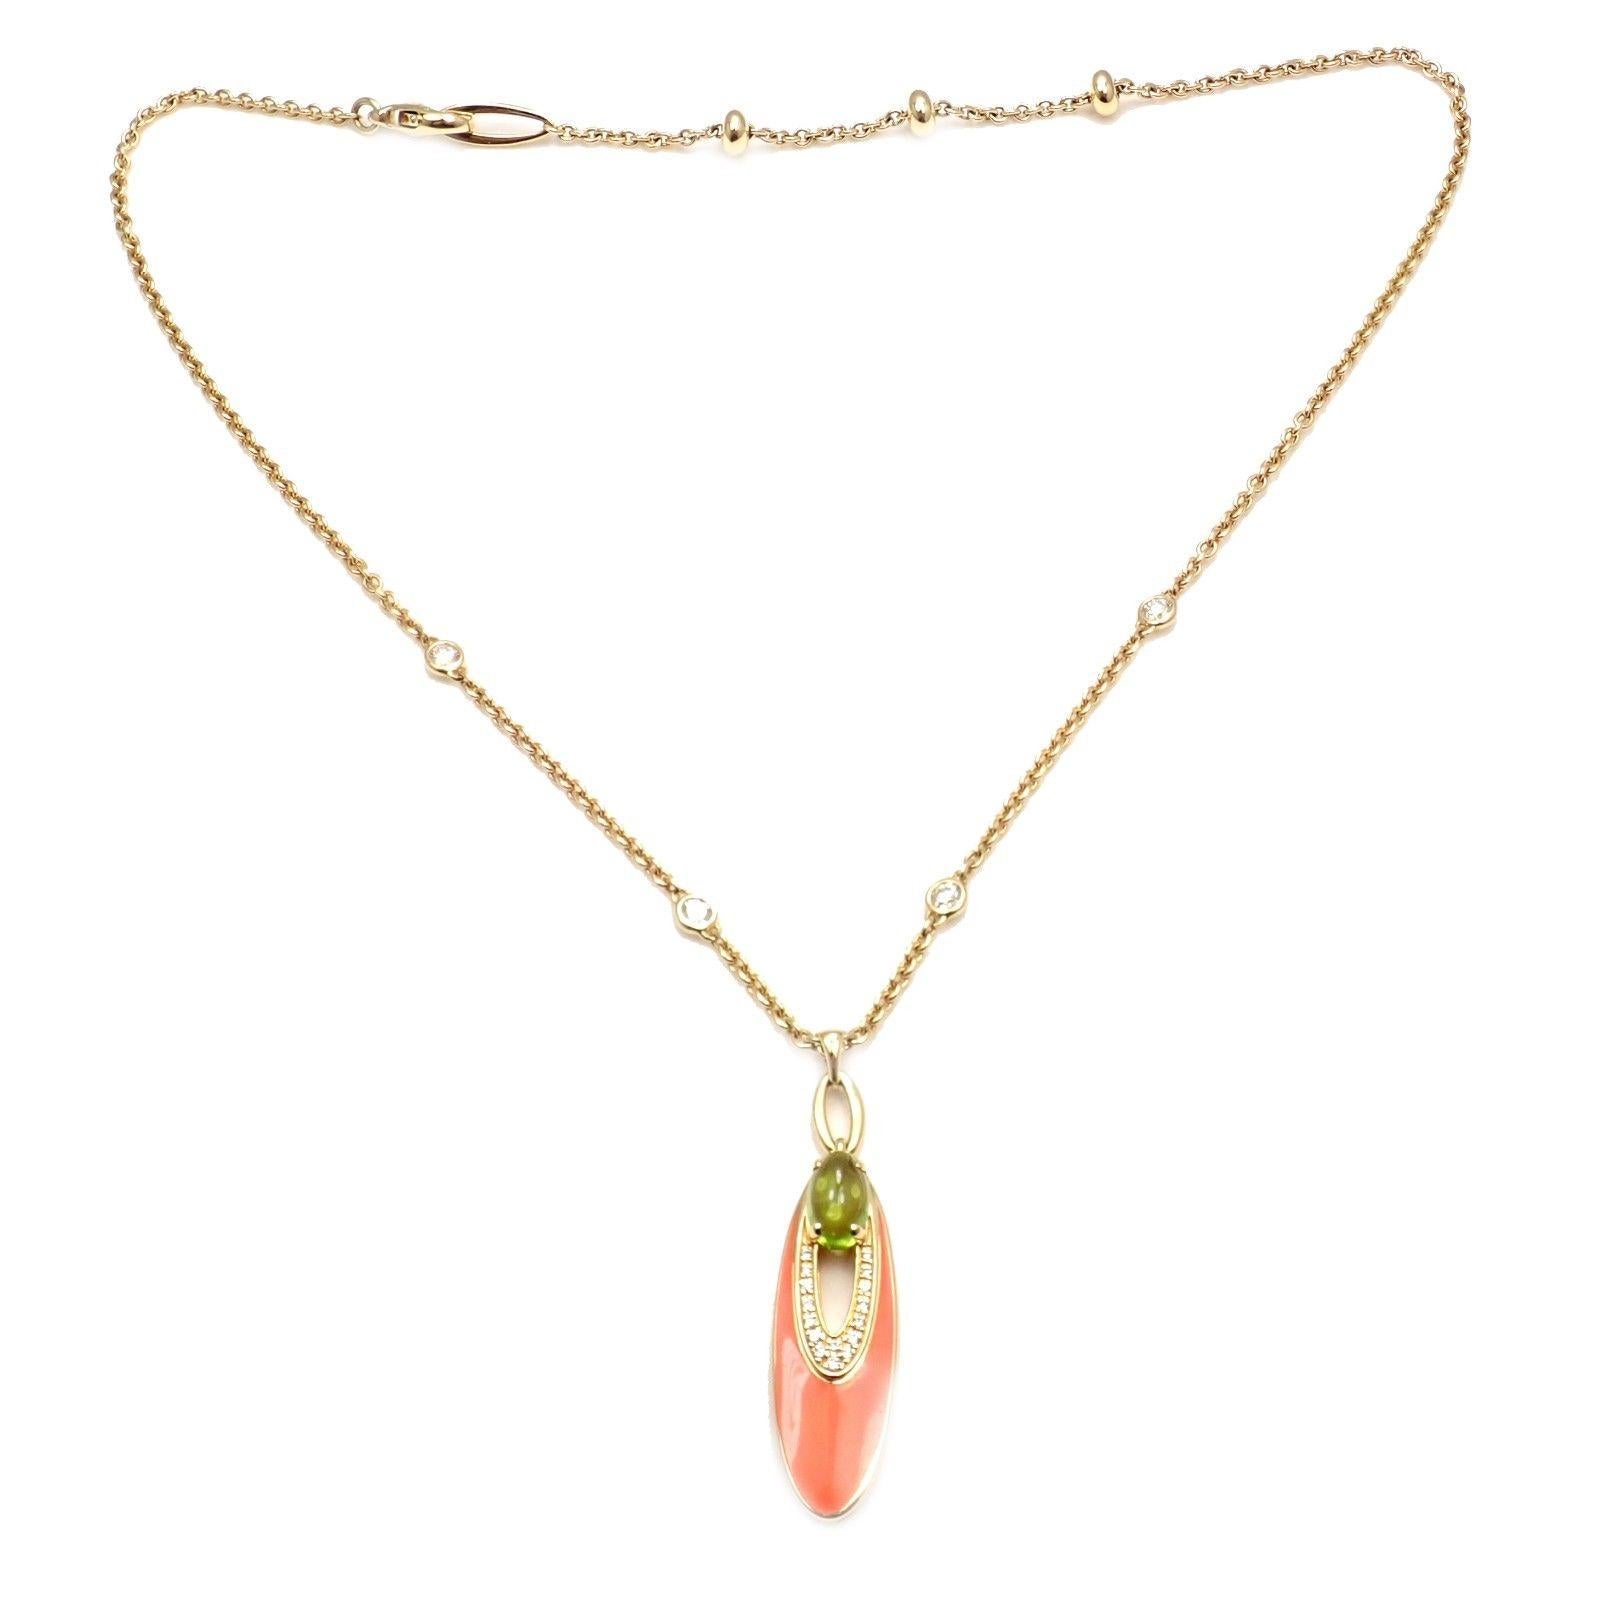 Bulgari Elisia Diamond Peridot Yellow Gold Pendant Necklace In Excellent Condition For Sale In Holland, PA